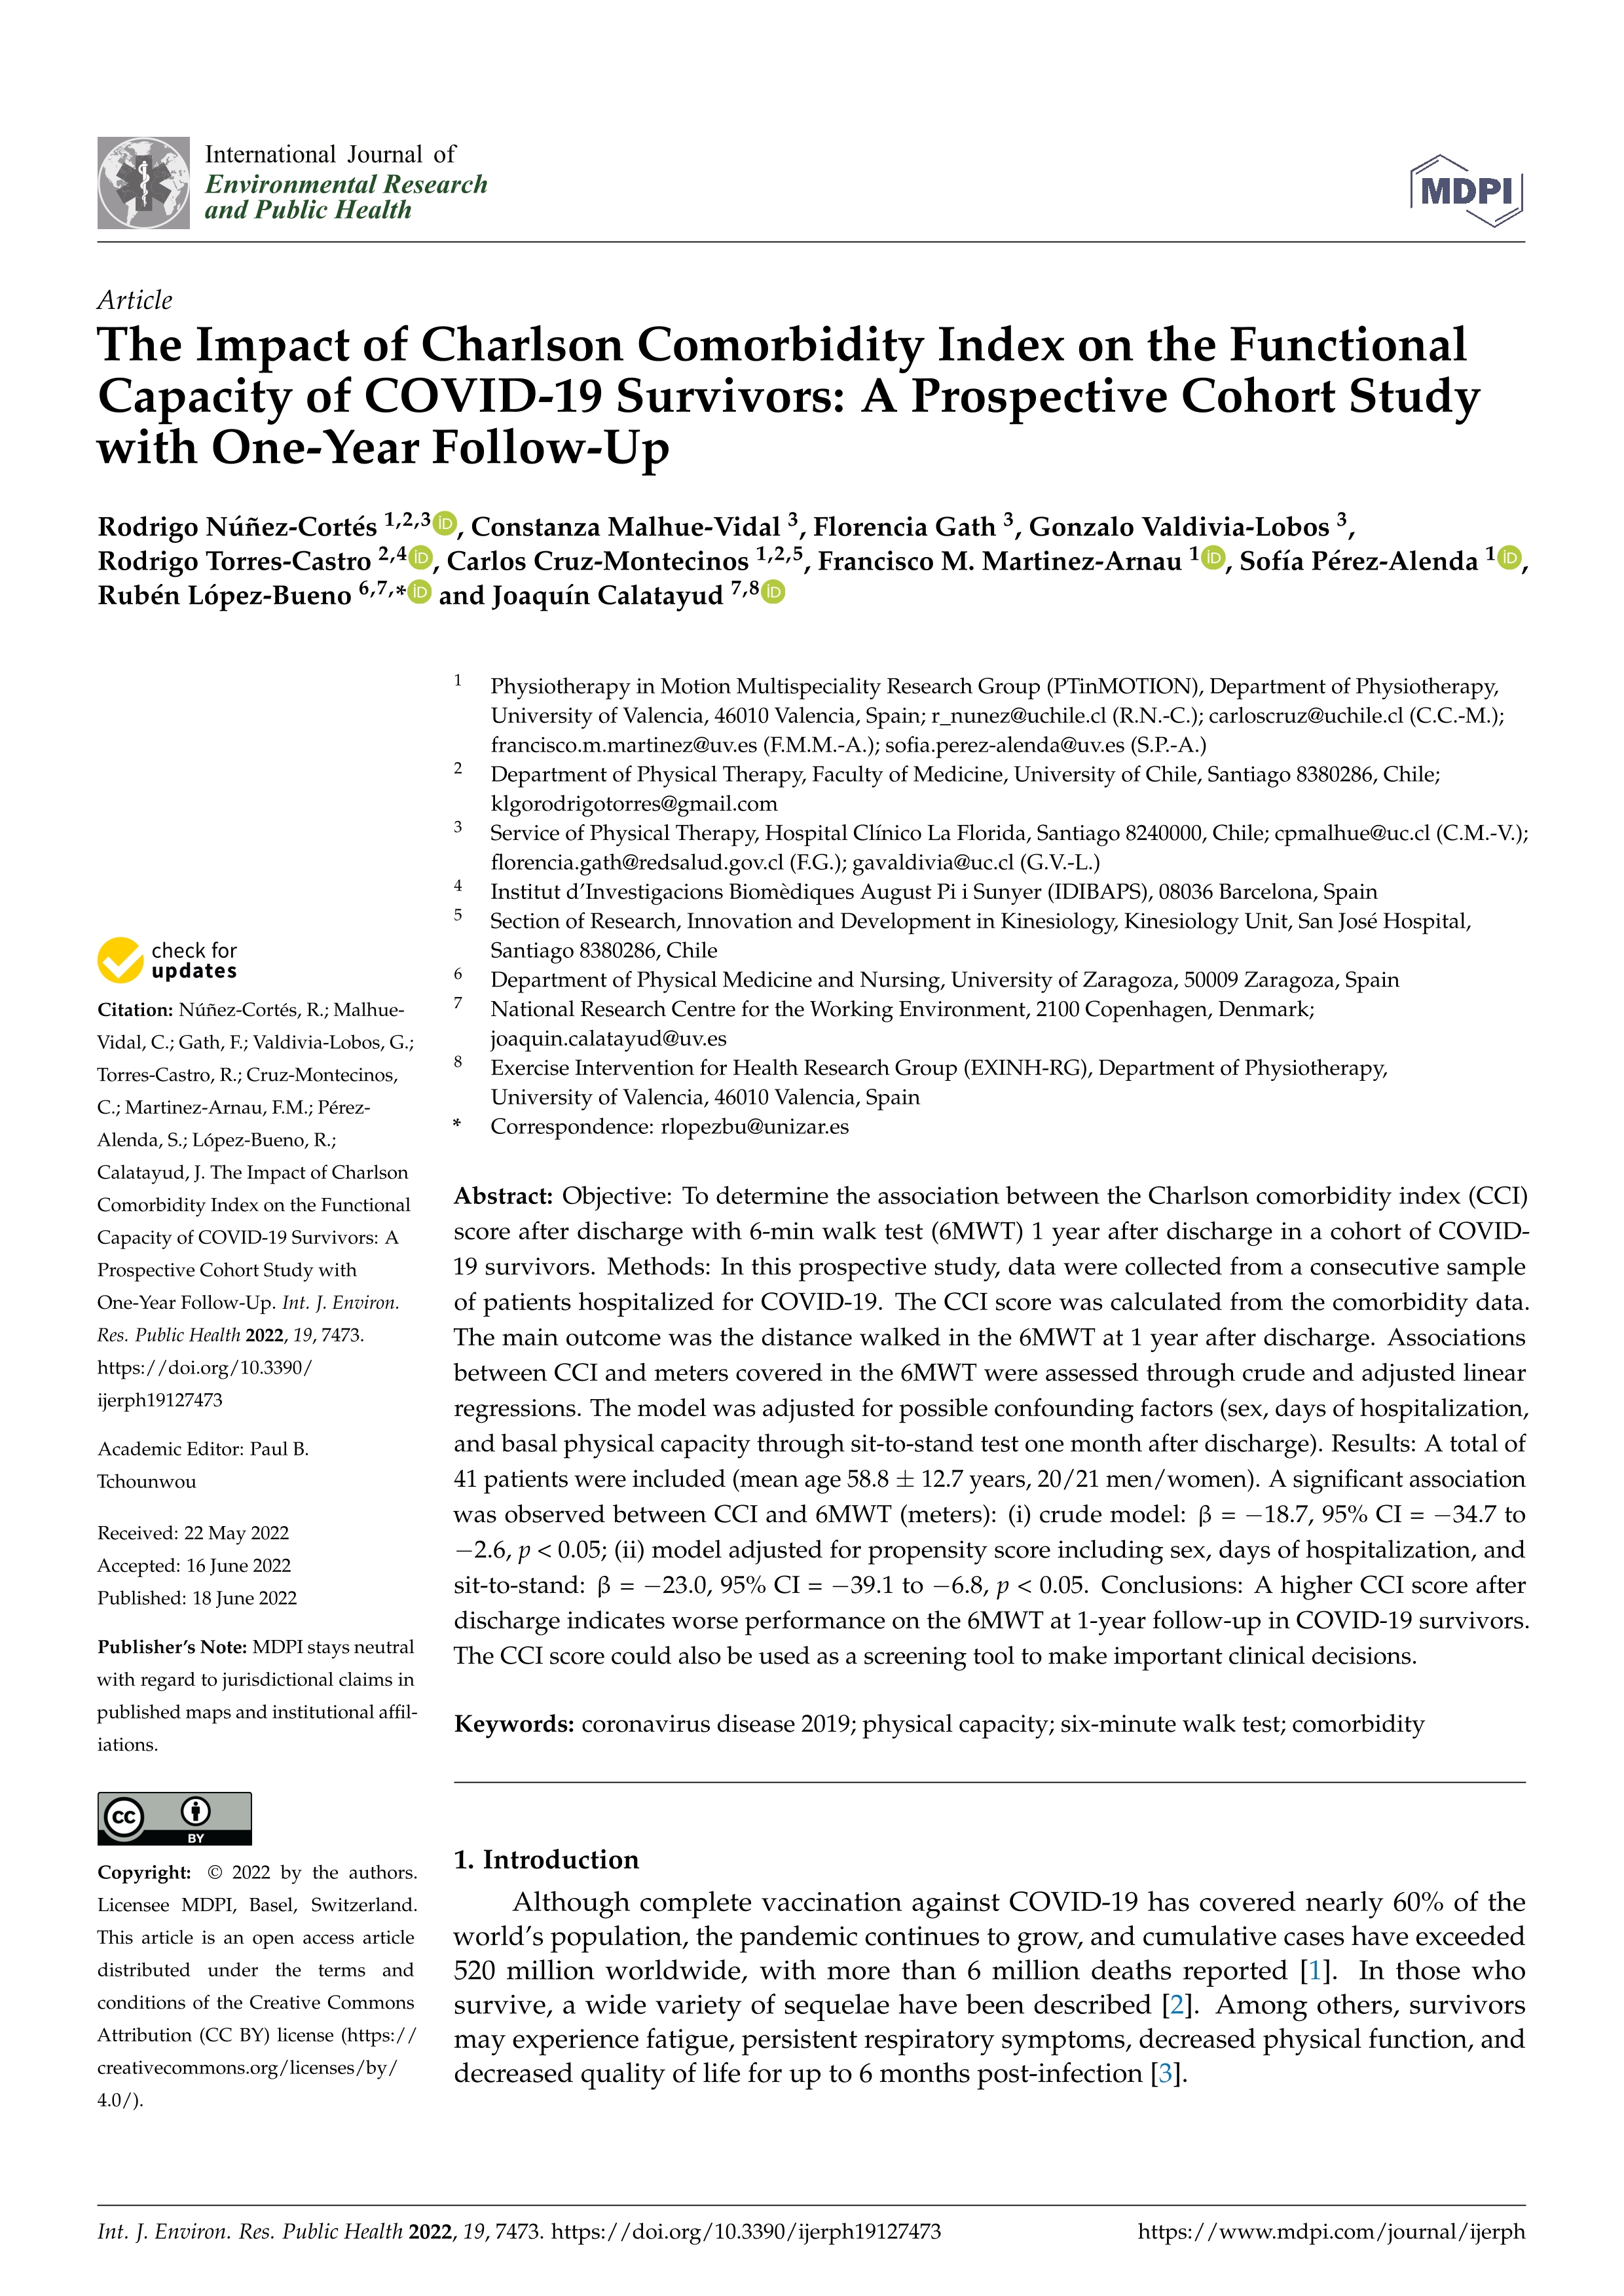 The impact of Charlson comorbidity index on the functional capacity of COVID-19 survivors: a prospective cohort study with one-year follow-up